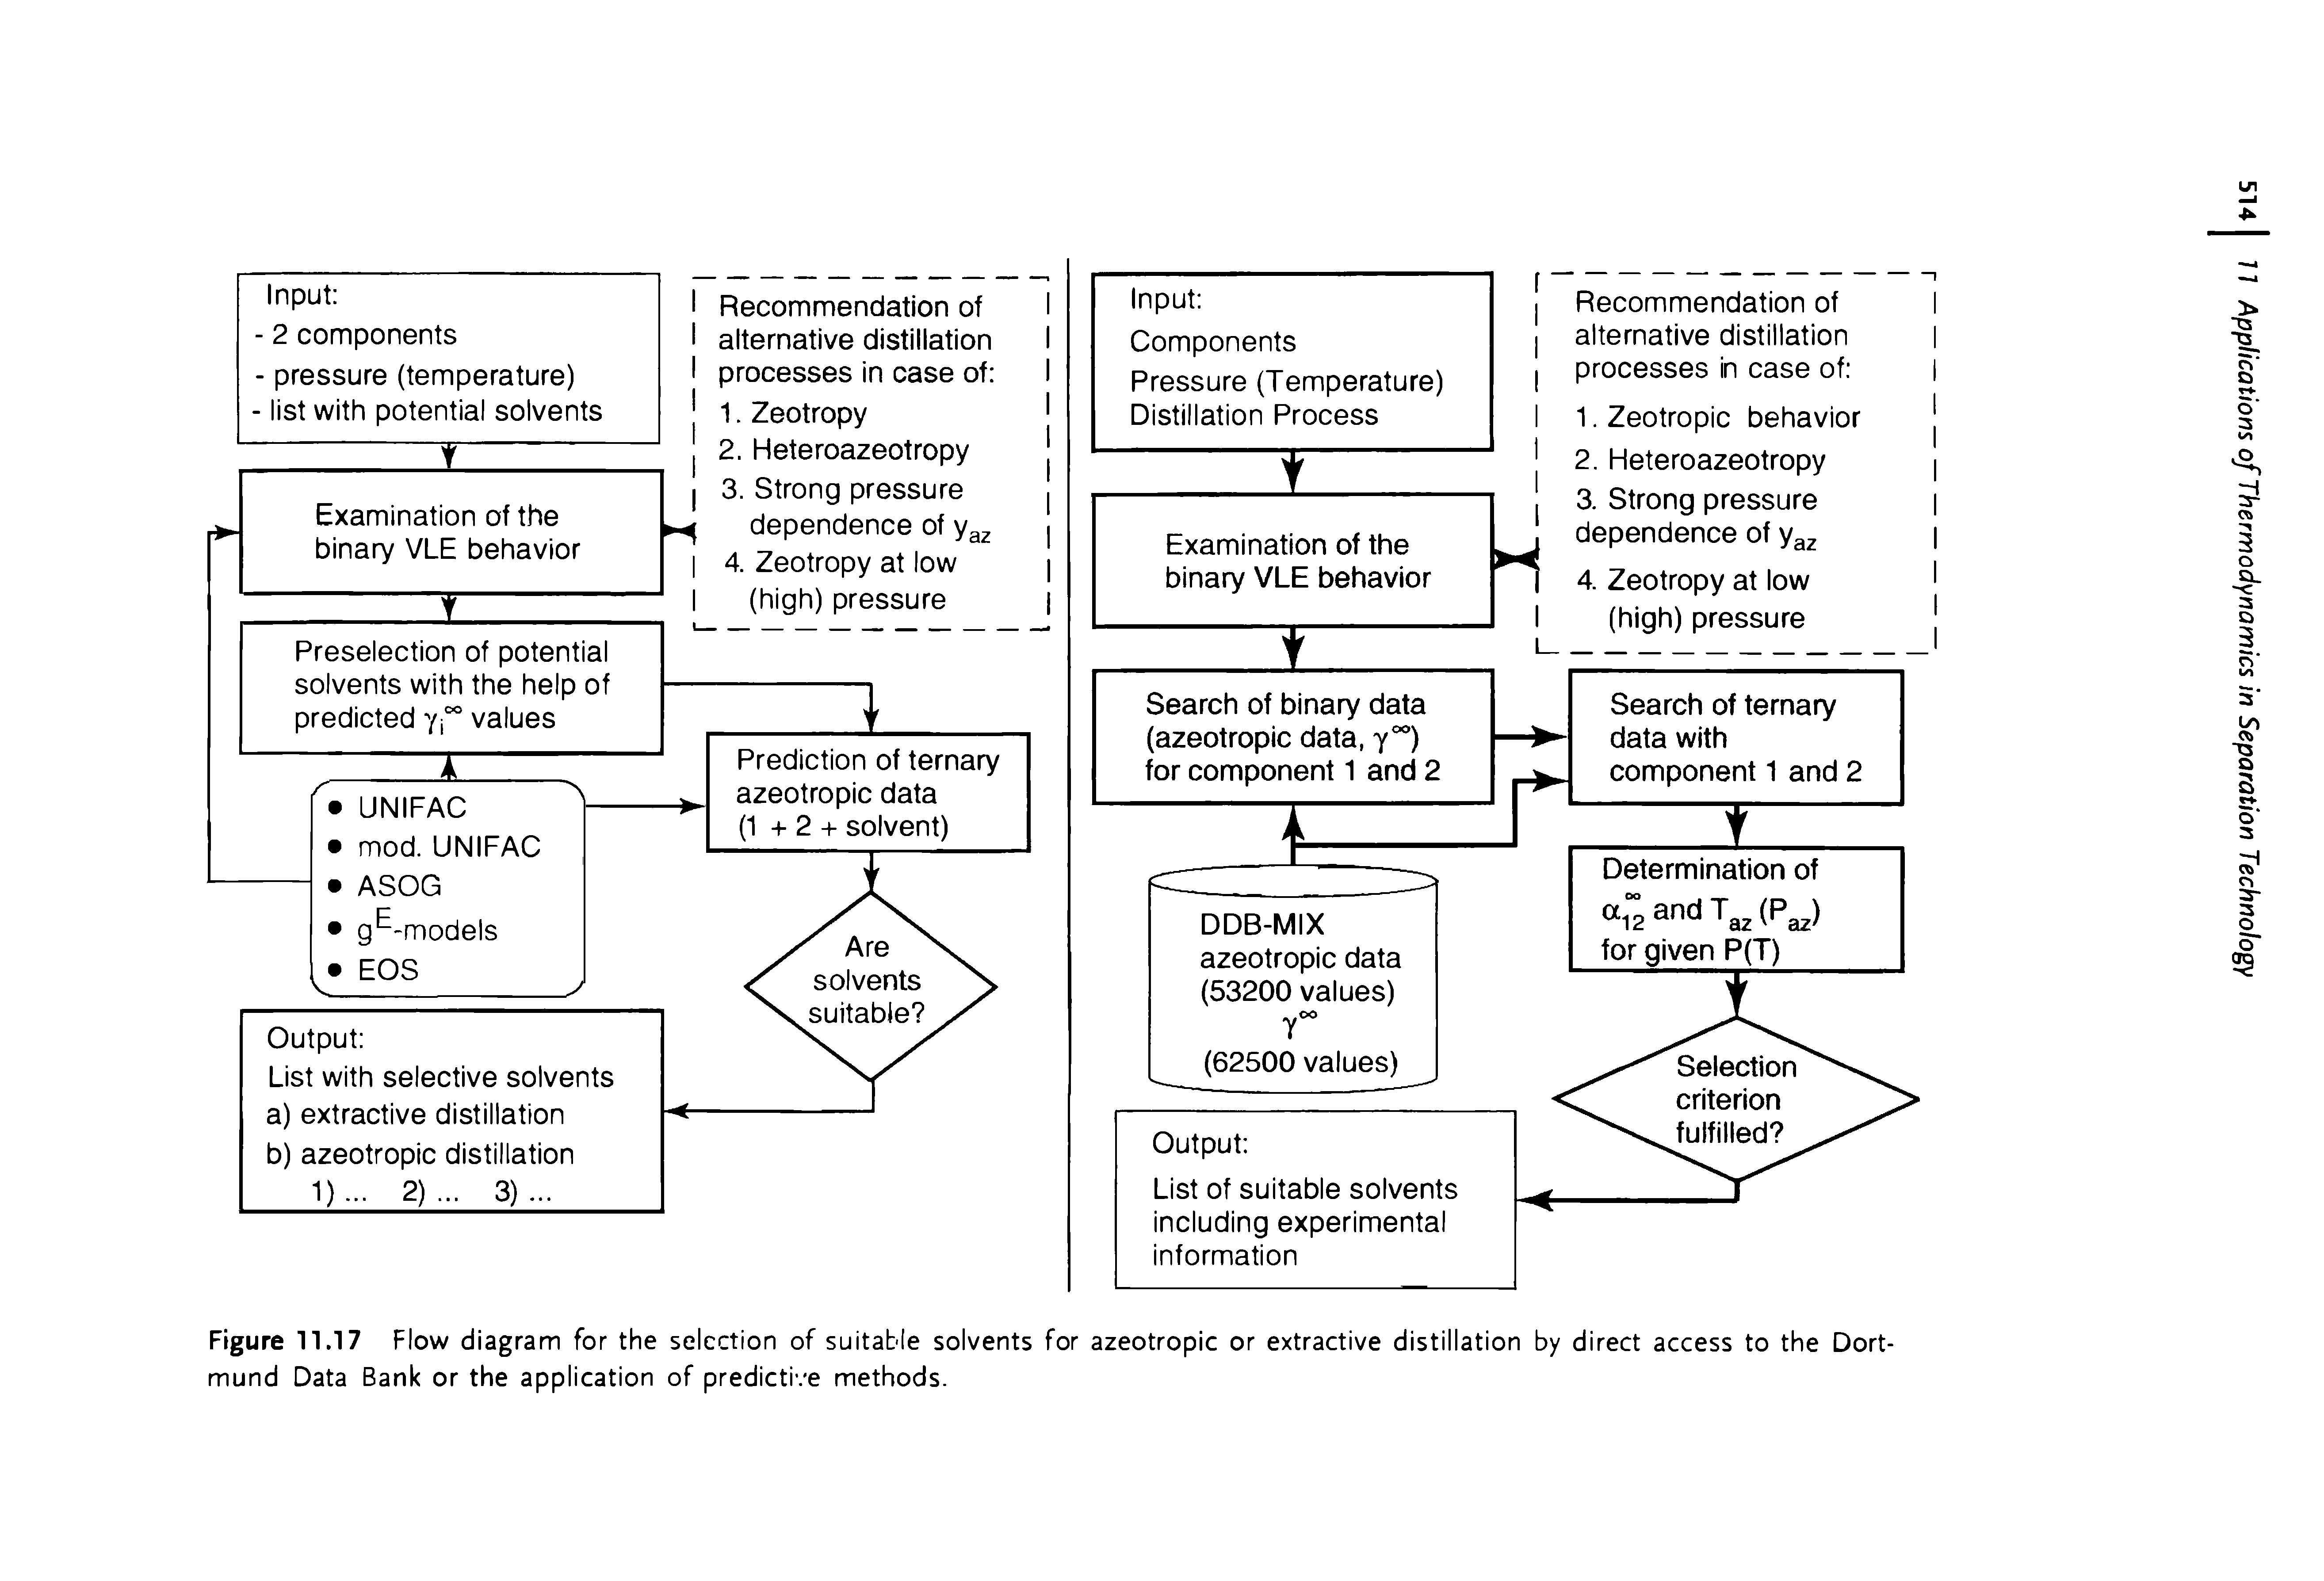 Figure 11.17 Flow diagram for the selection of suitable solvents for azeotropic or extractive distillation by direct access to the Dortmund Data Bank or the application of predictive methods.